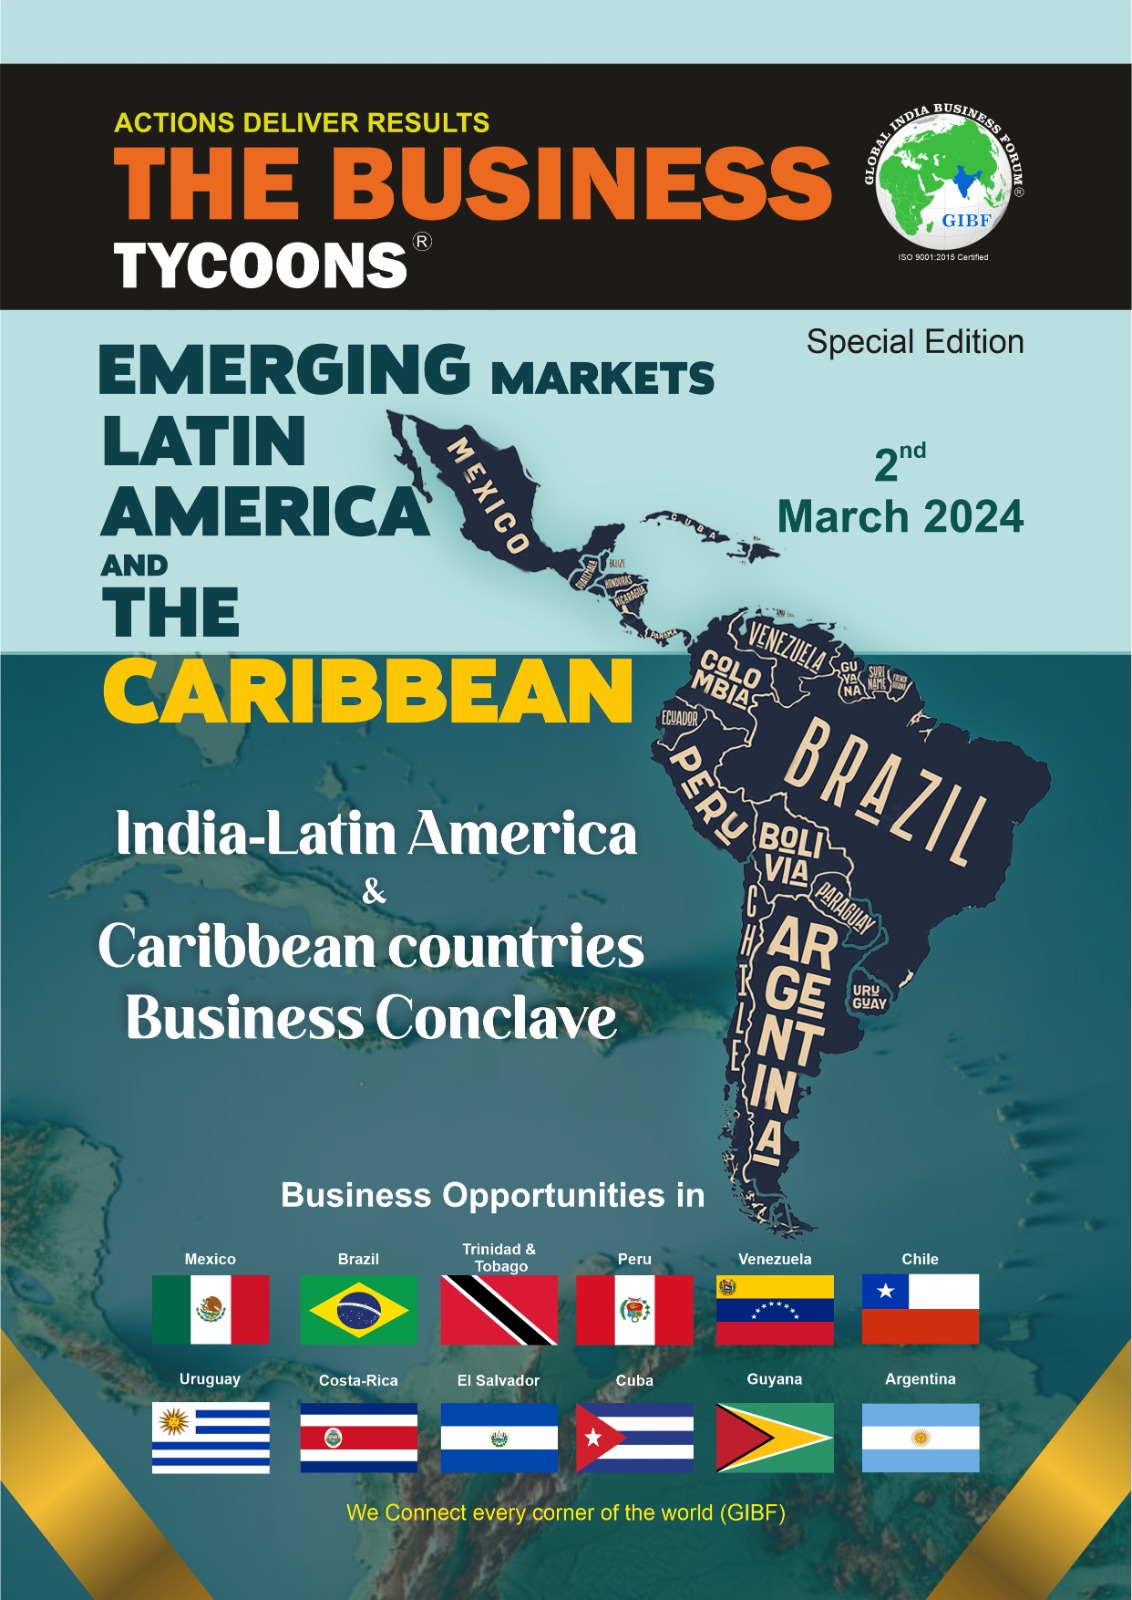 The Business Tycoons  Emerging Markets – Latin America and The Caribbean